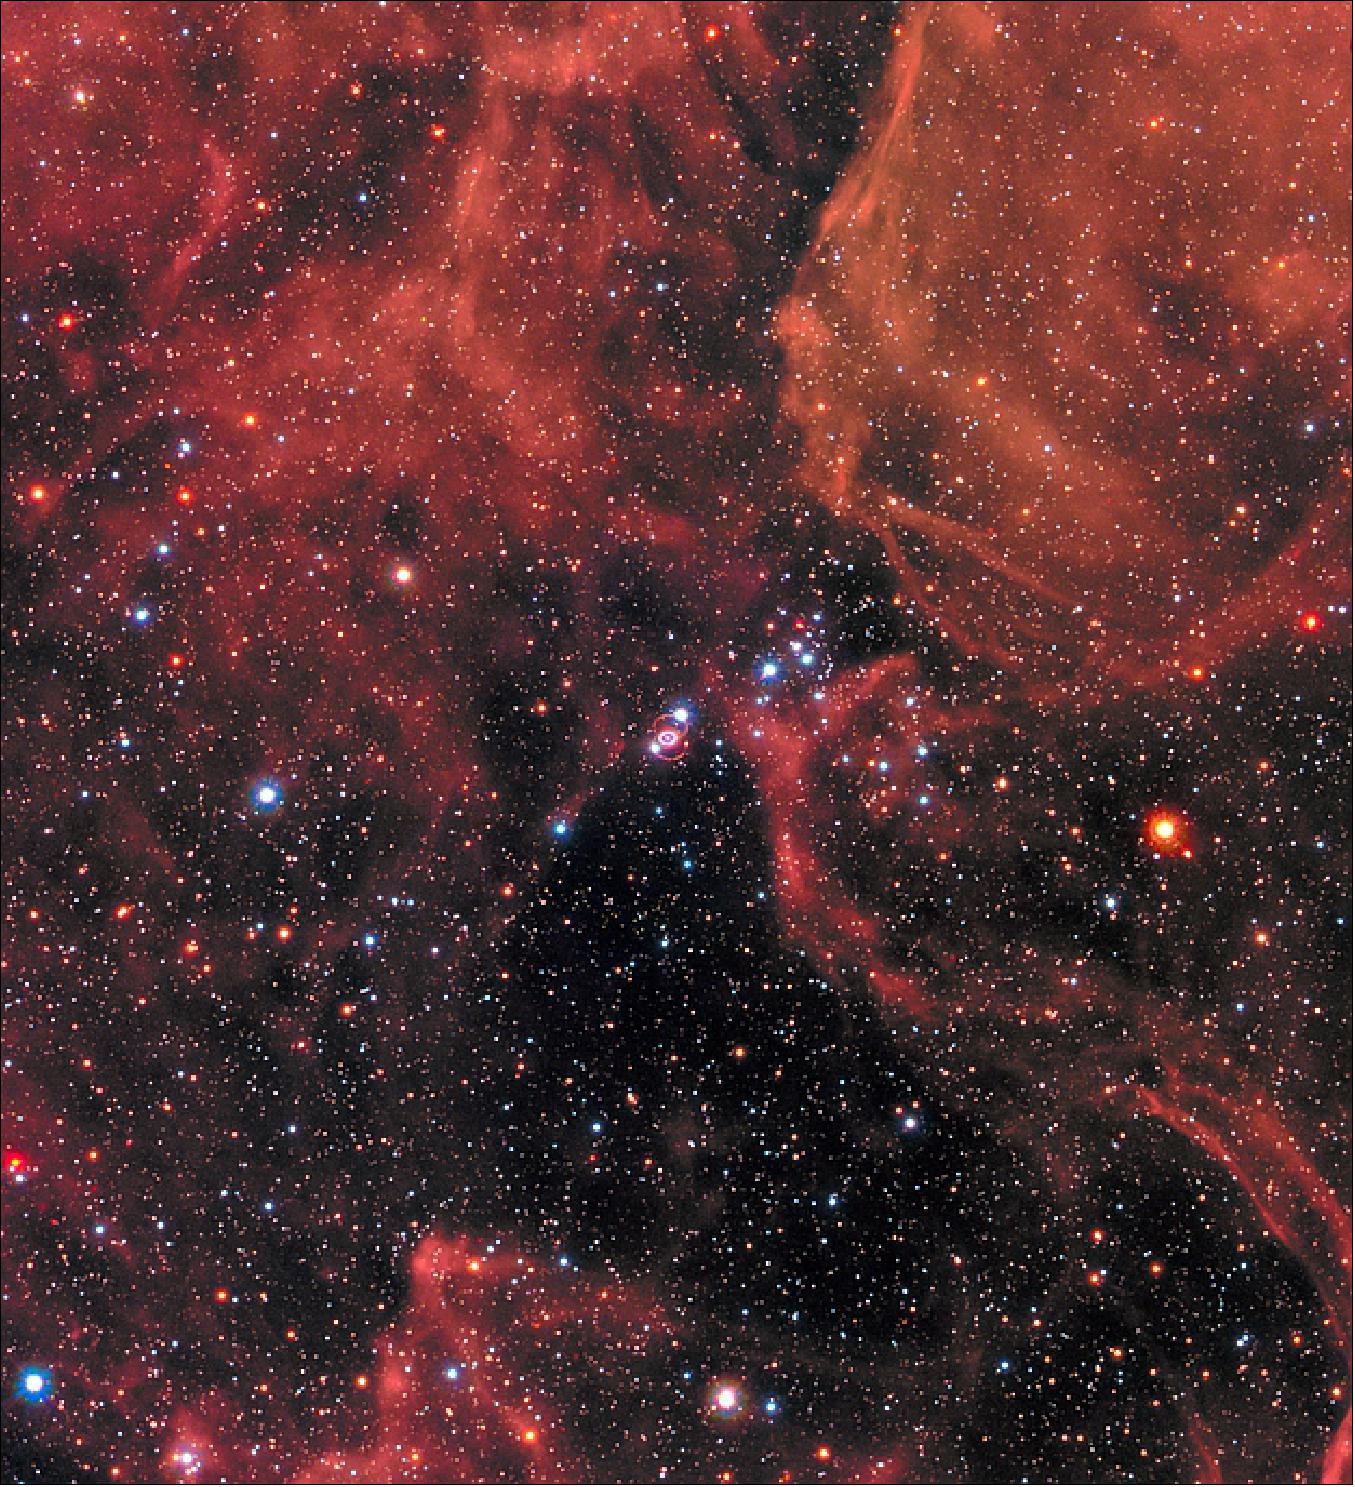 Figure 52: This new image of the supernova remnant SN 1987A was taken by the NASA/ESA Hubble Space Telescope in January 2017 using its WFC3 (Wide Field Camera 3), image credit: NASA, ESA, and R. Kirshner (Harvard-Smithsonian Center for Astrophysics and Gordon and Betty Moore Foundation) and P. Challis (Harvard-Smithsonian Center for Astrophysics)